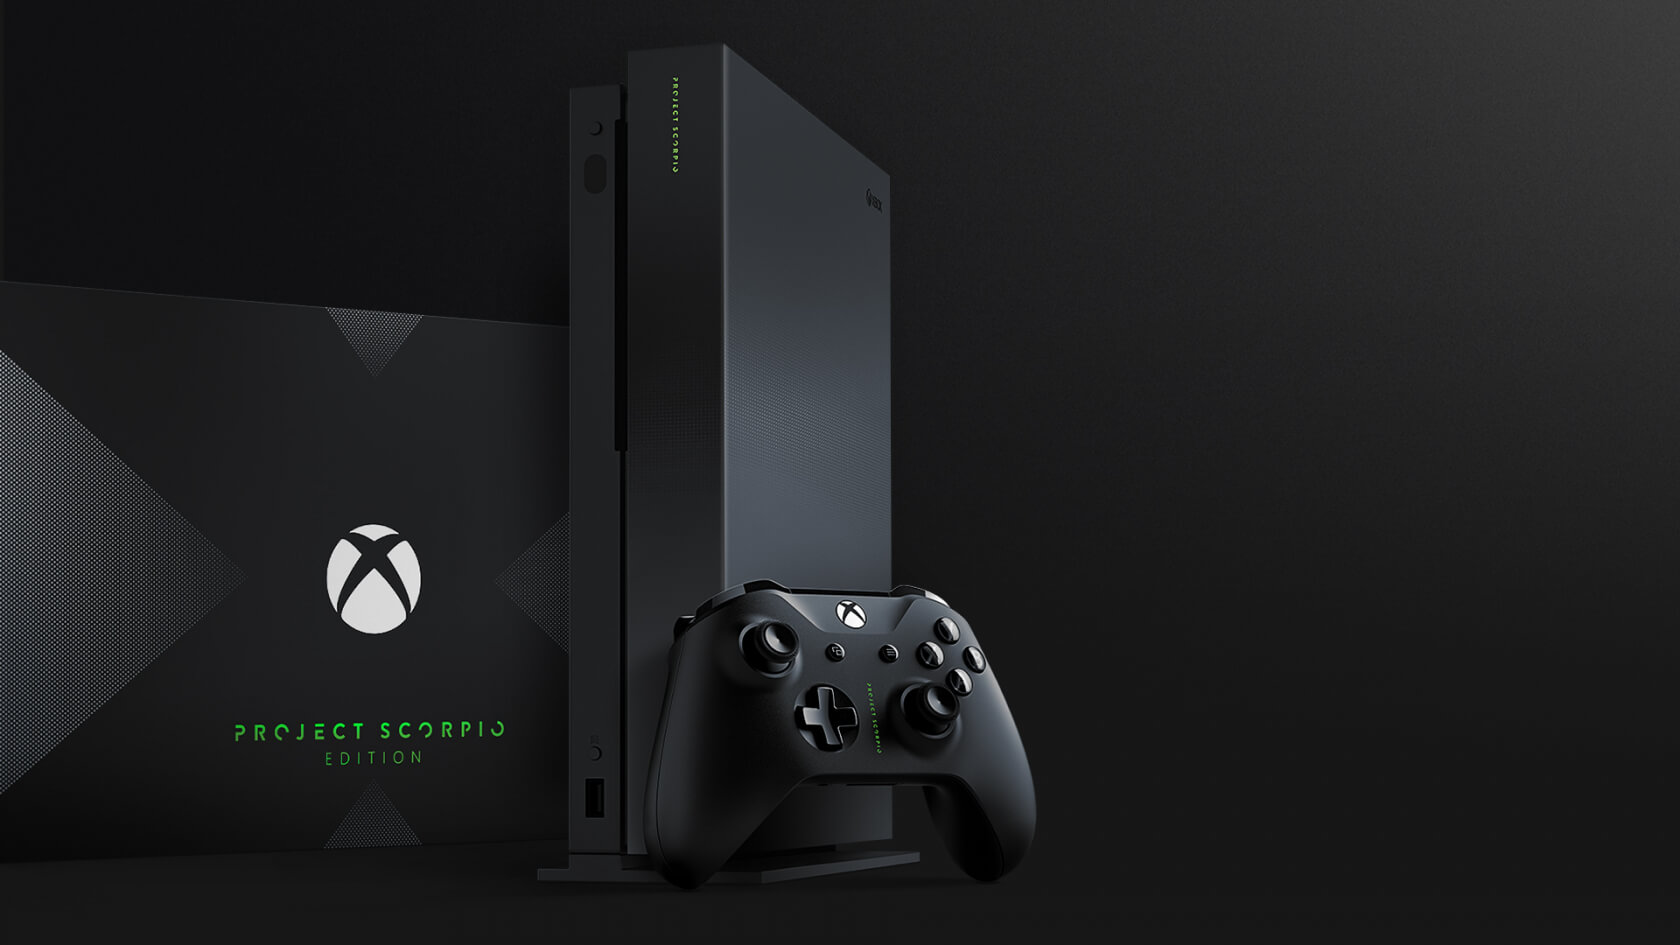 Xbox One X Scorpio Edition nearly sold out, over 100 games optimized for 4K